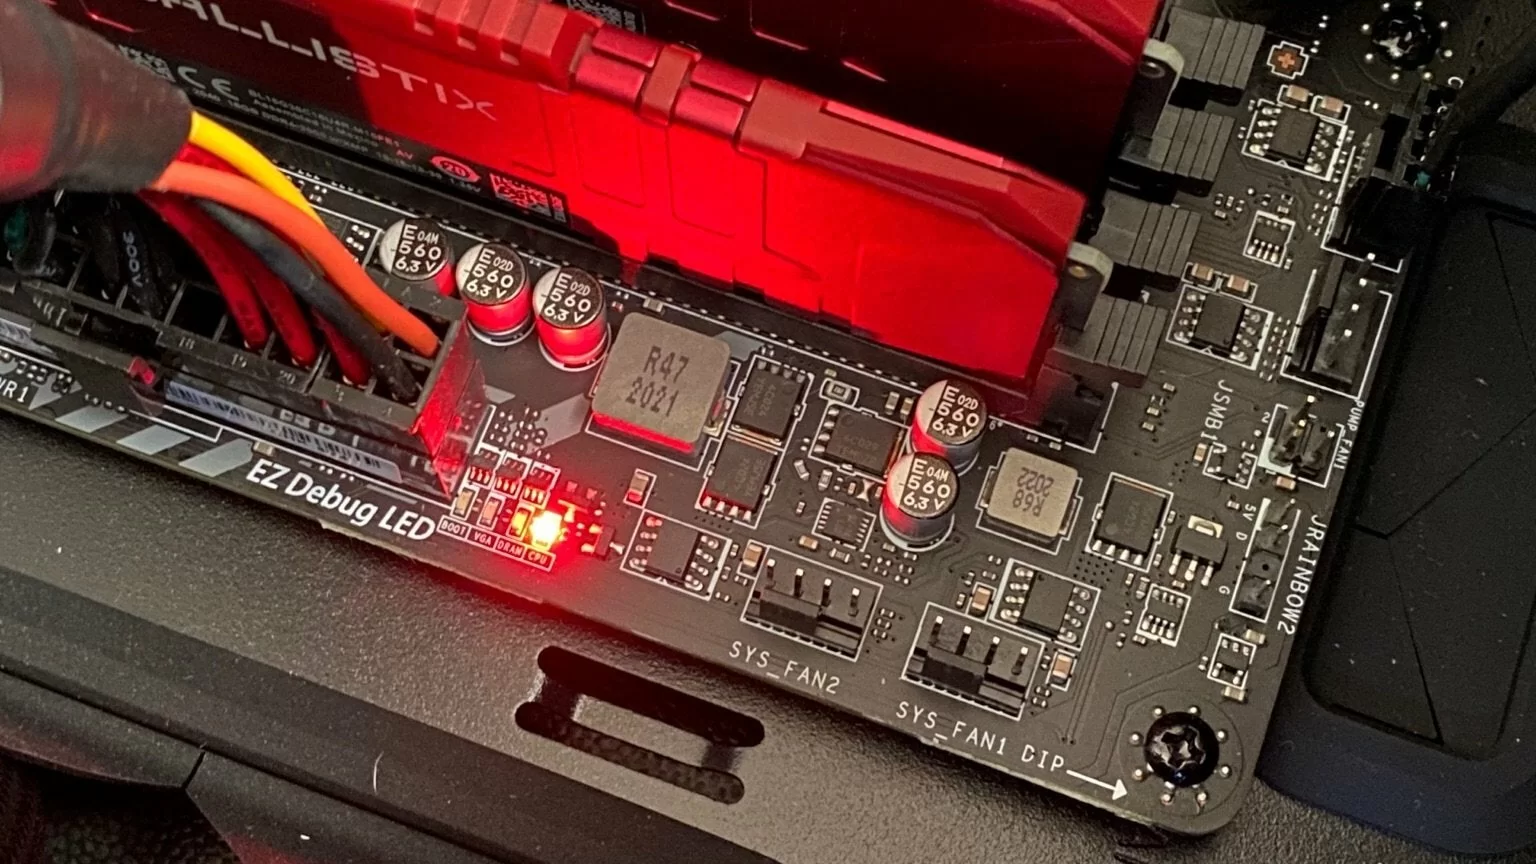 Why Is The CPU Light On My Motherboard On